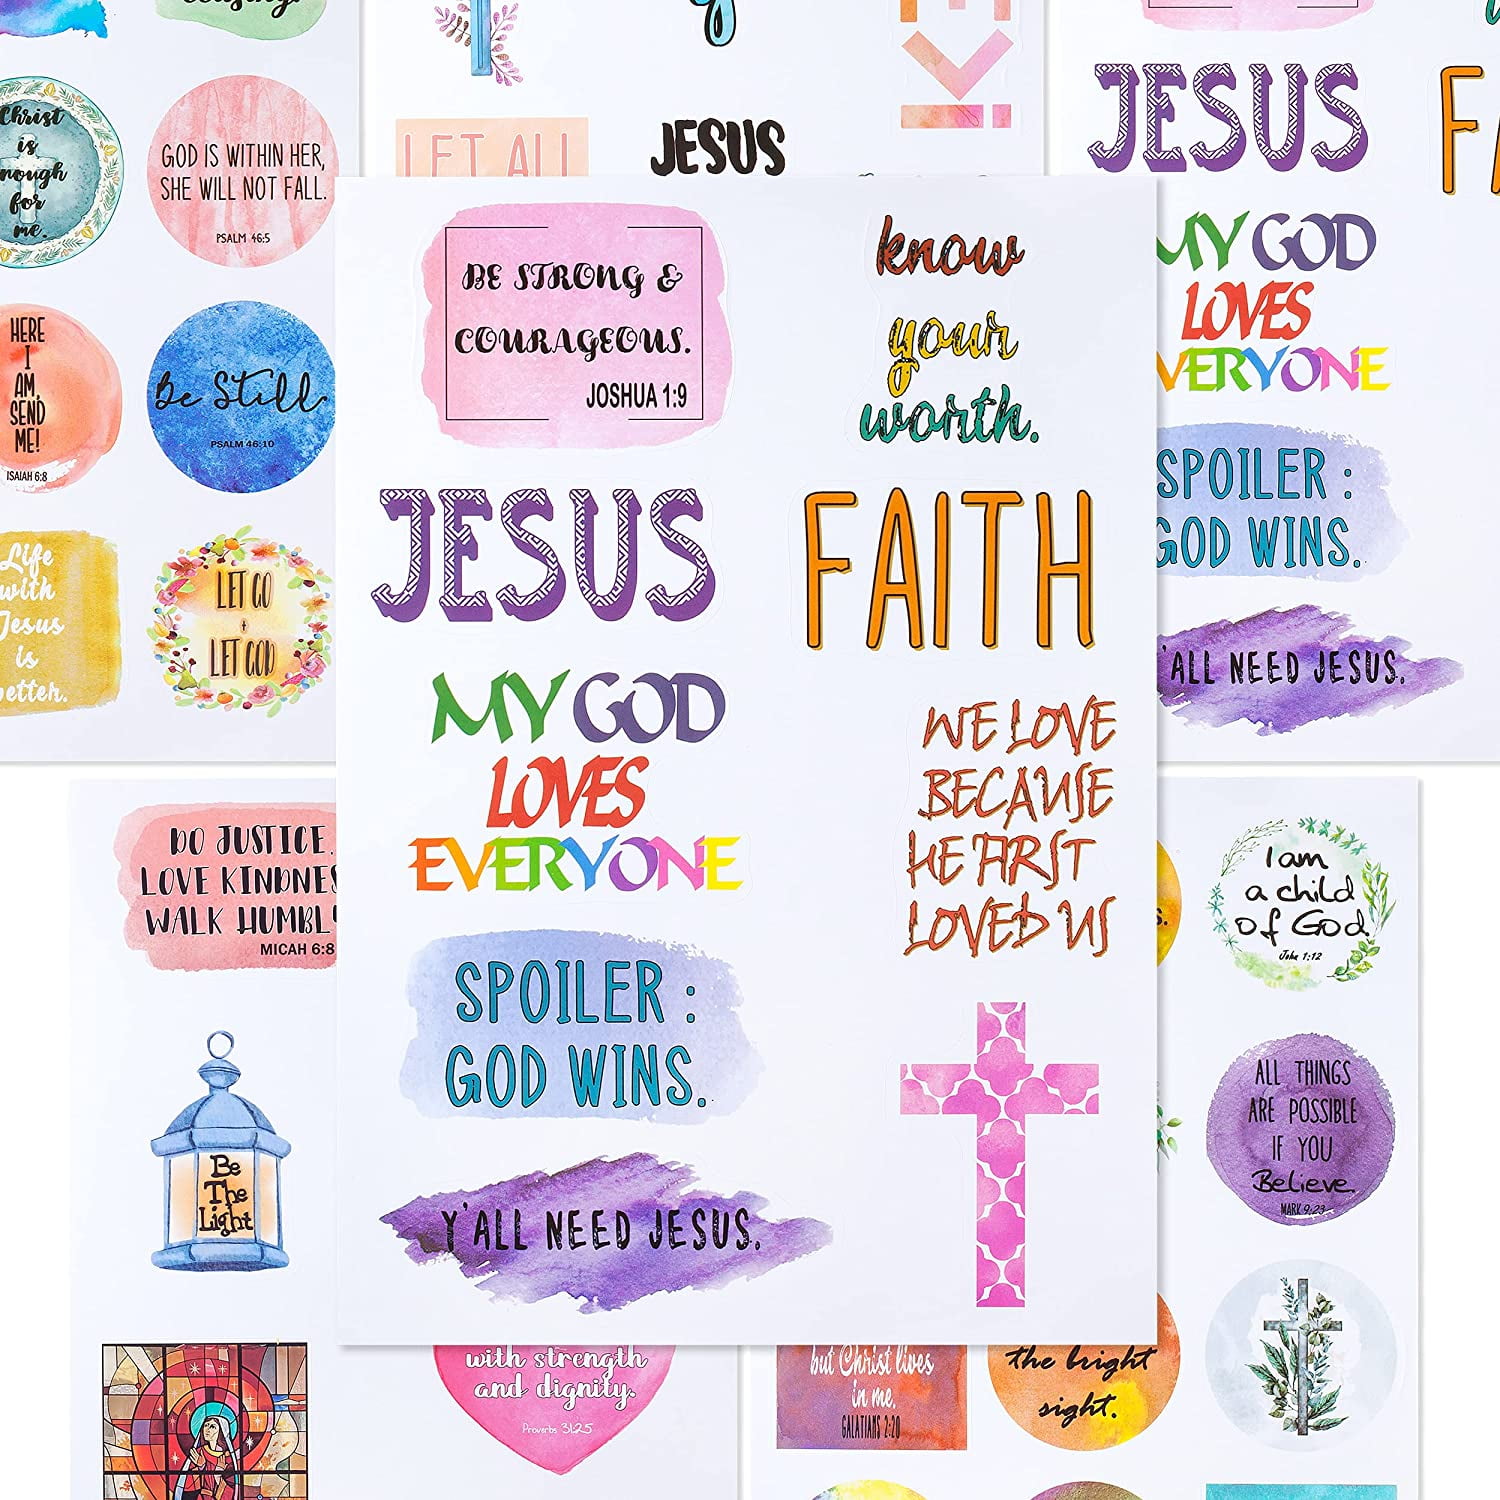 Religious Text (Bible) Content Warning Stickers (4-Pack) at Under